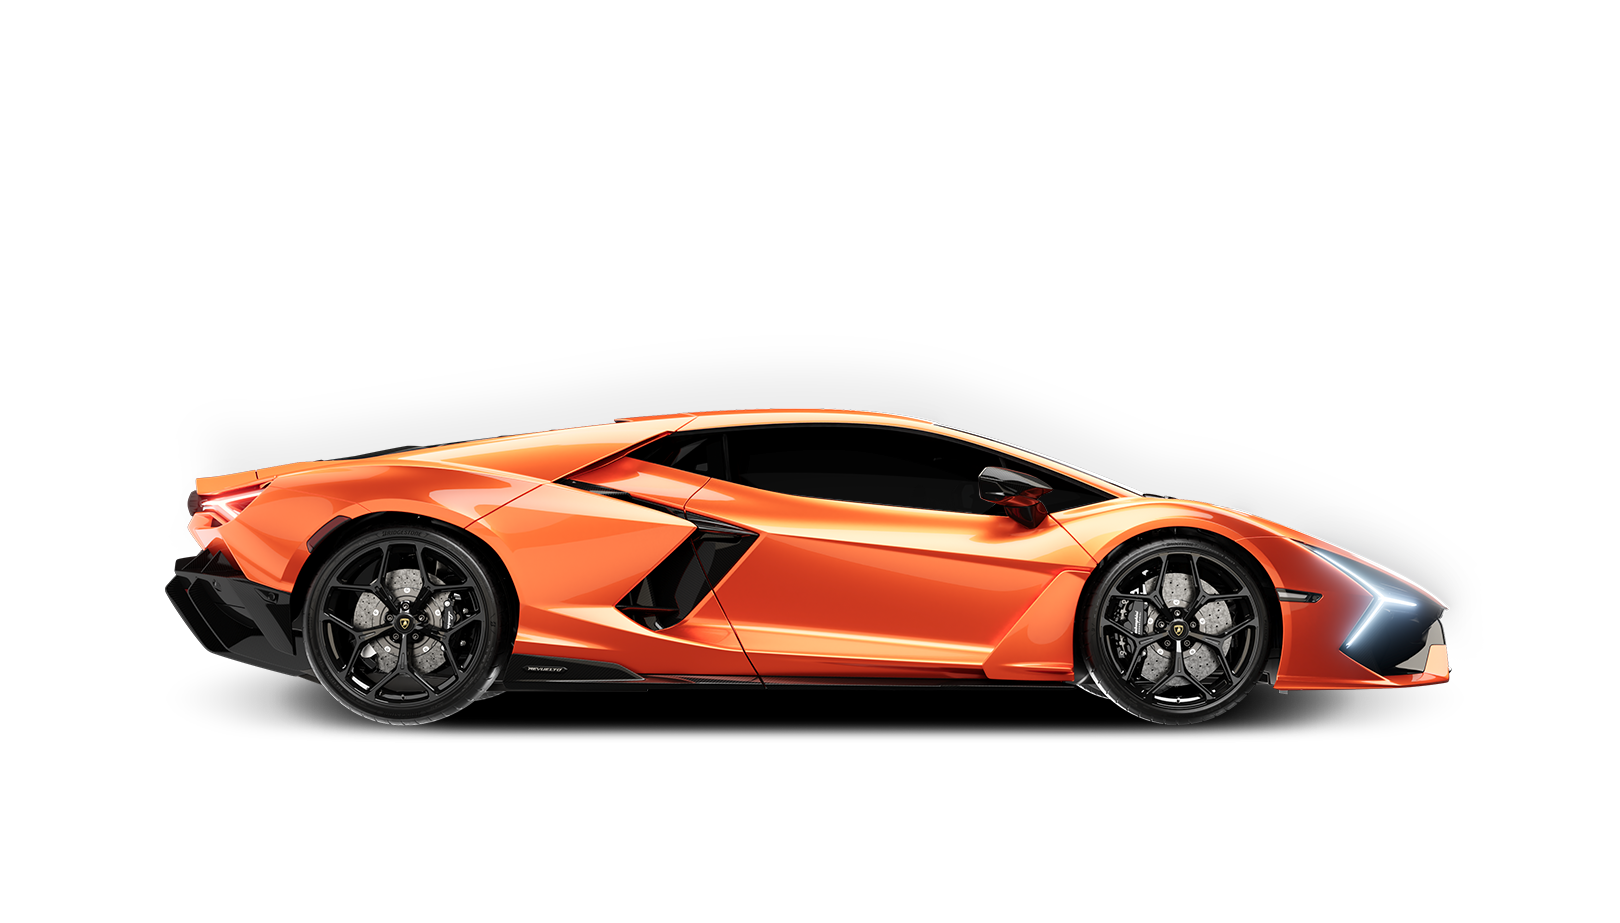 Lamborghini - Being visionary is seeing new ways to use